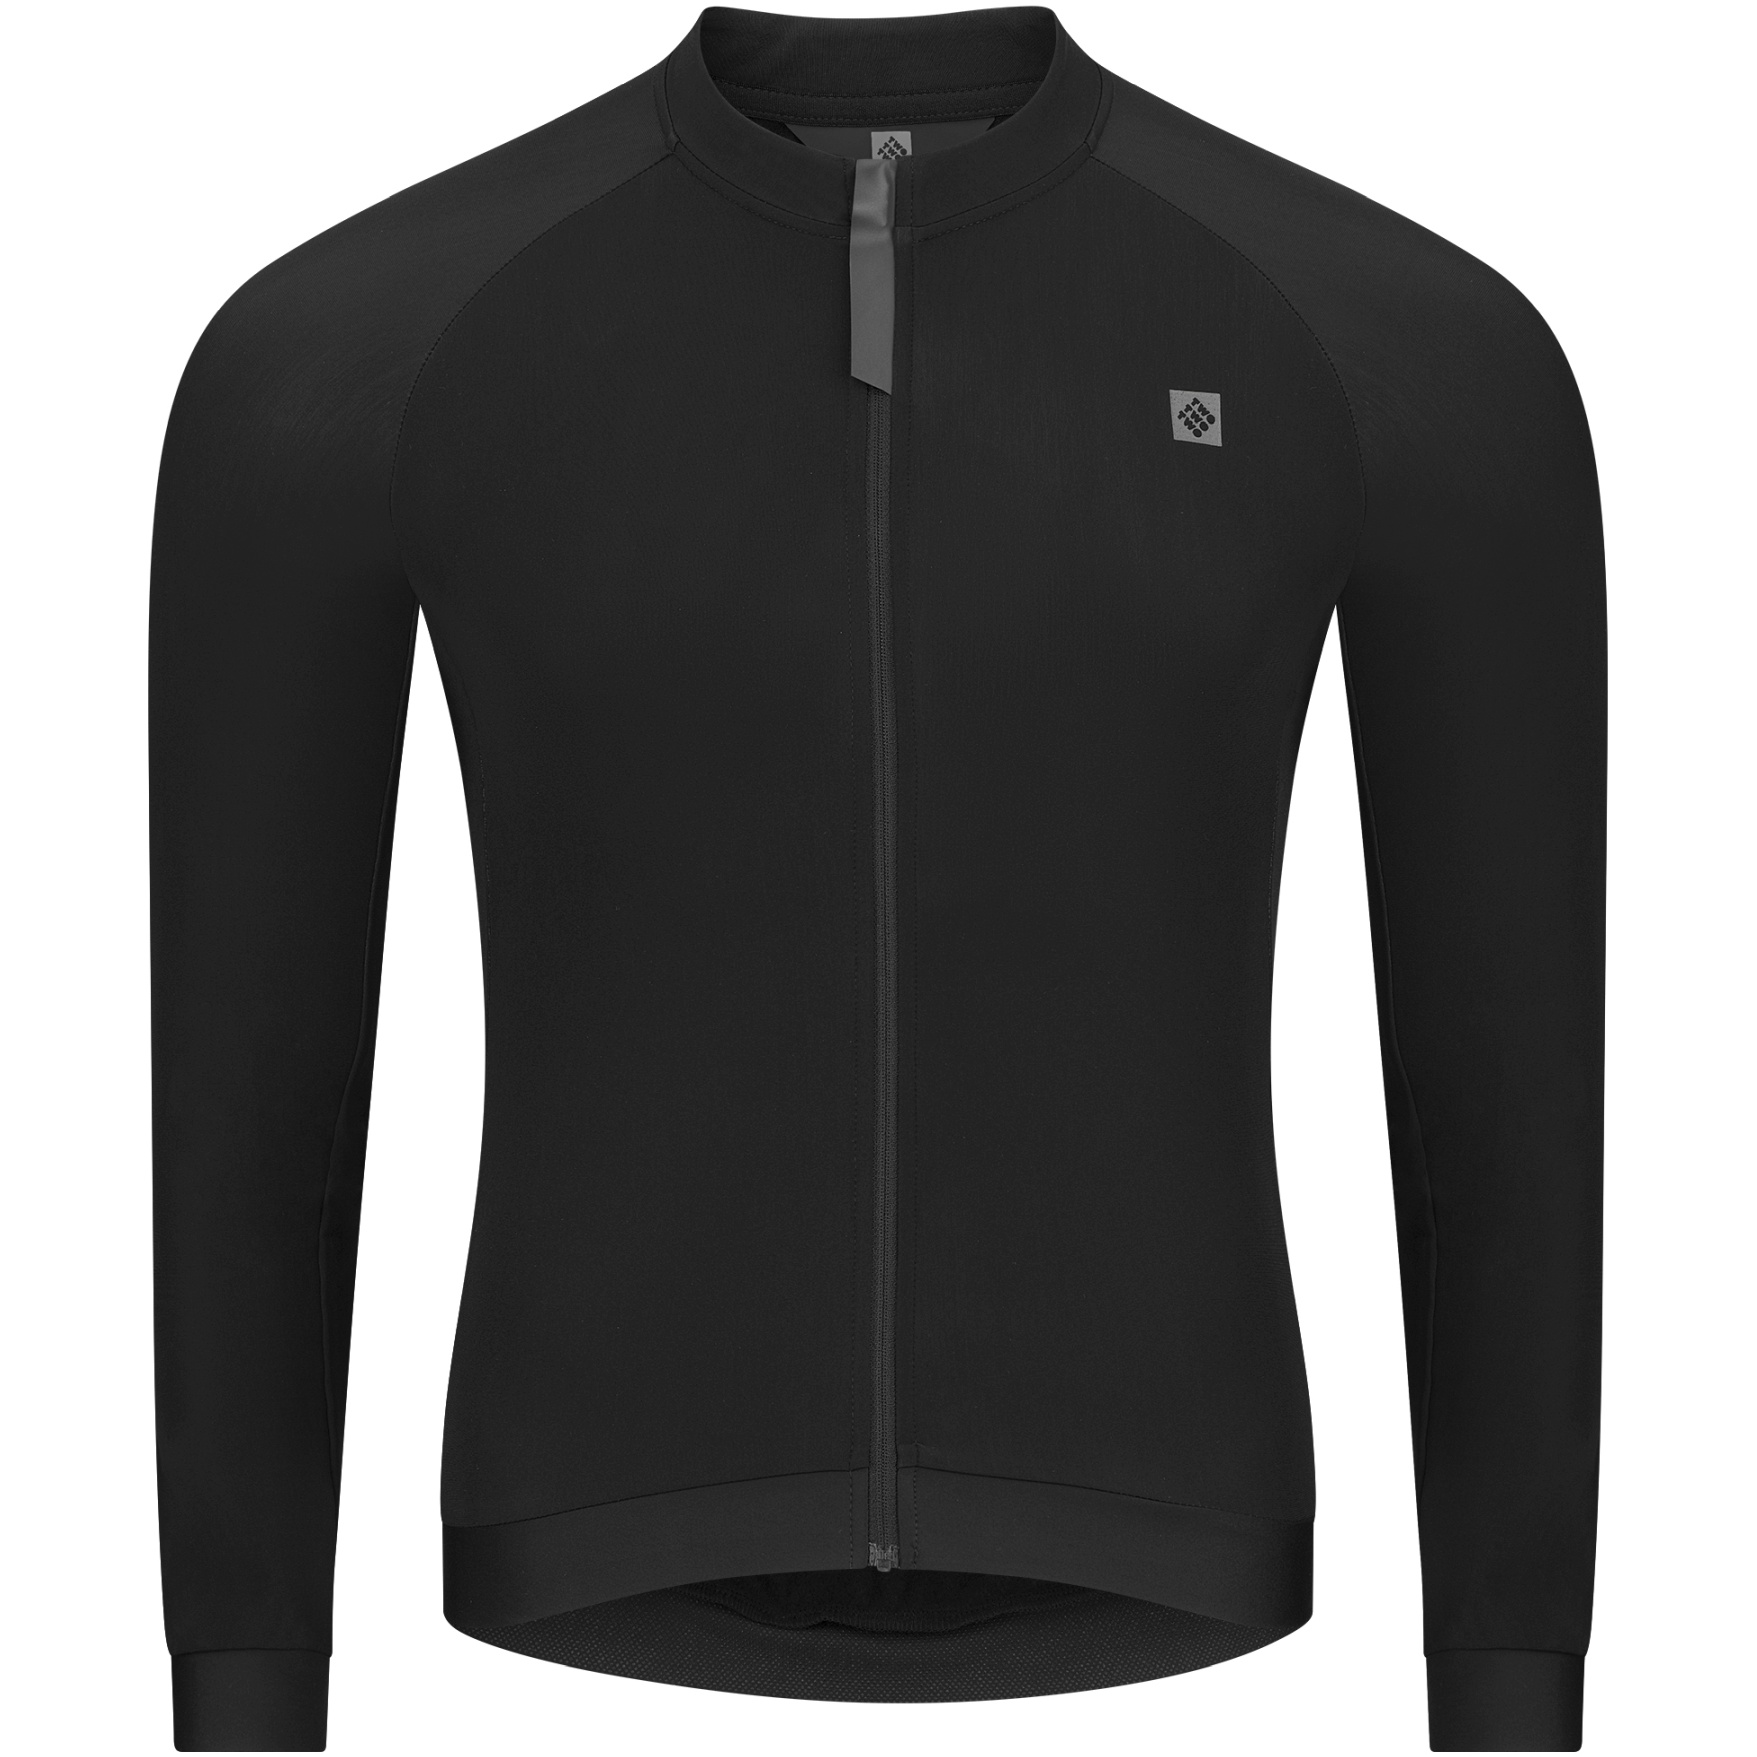 Image of triple2 Velozip LS Pro Jersey - moonless night